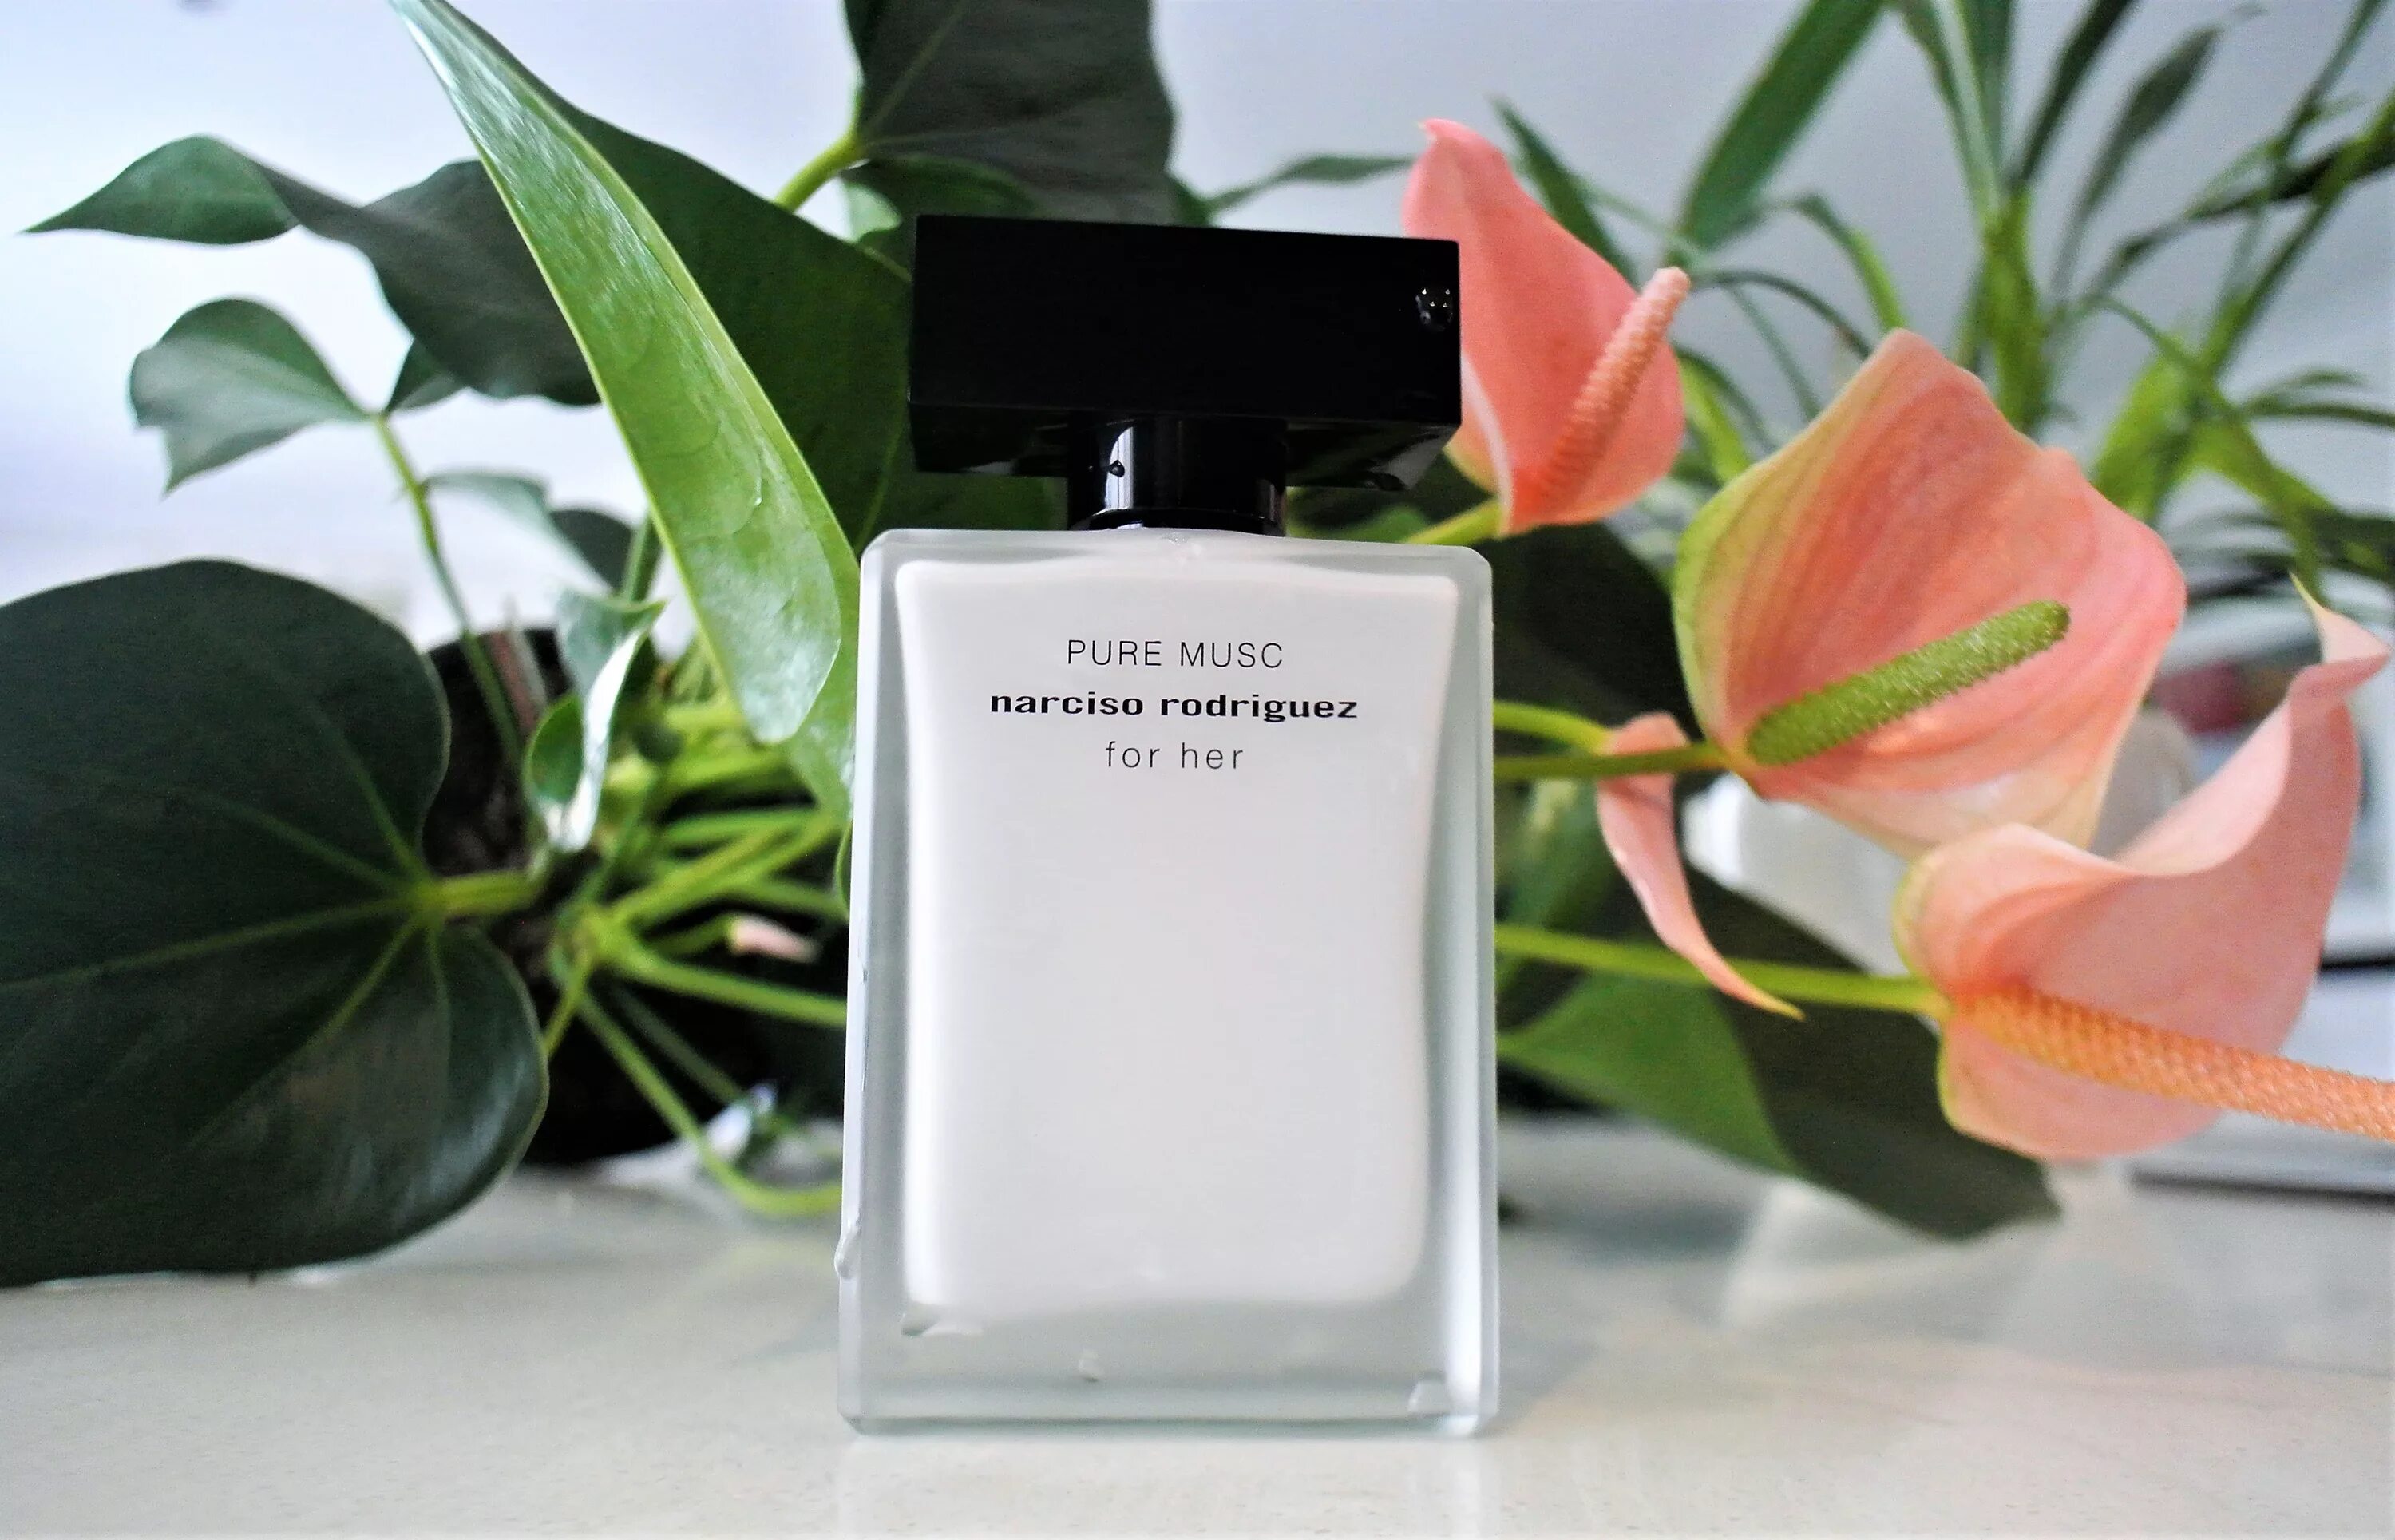 Narciso Rodriguez for her Pure Musc EDP 20ml. Narciso Rodriguez Pure Musc for her 30ml EDP. EDP Narciso Rodriguez Pure Musc for her 50 ml. Pure Musk Narciso Rodriguez for her. Narciso rodriguez musc купить